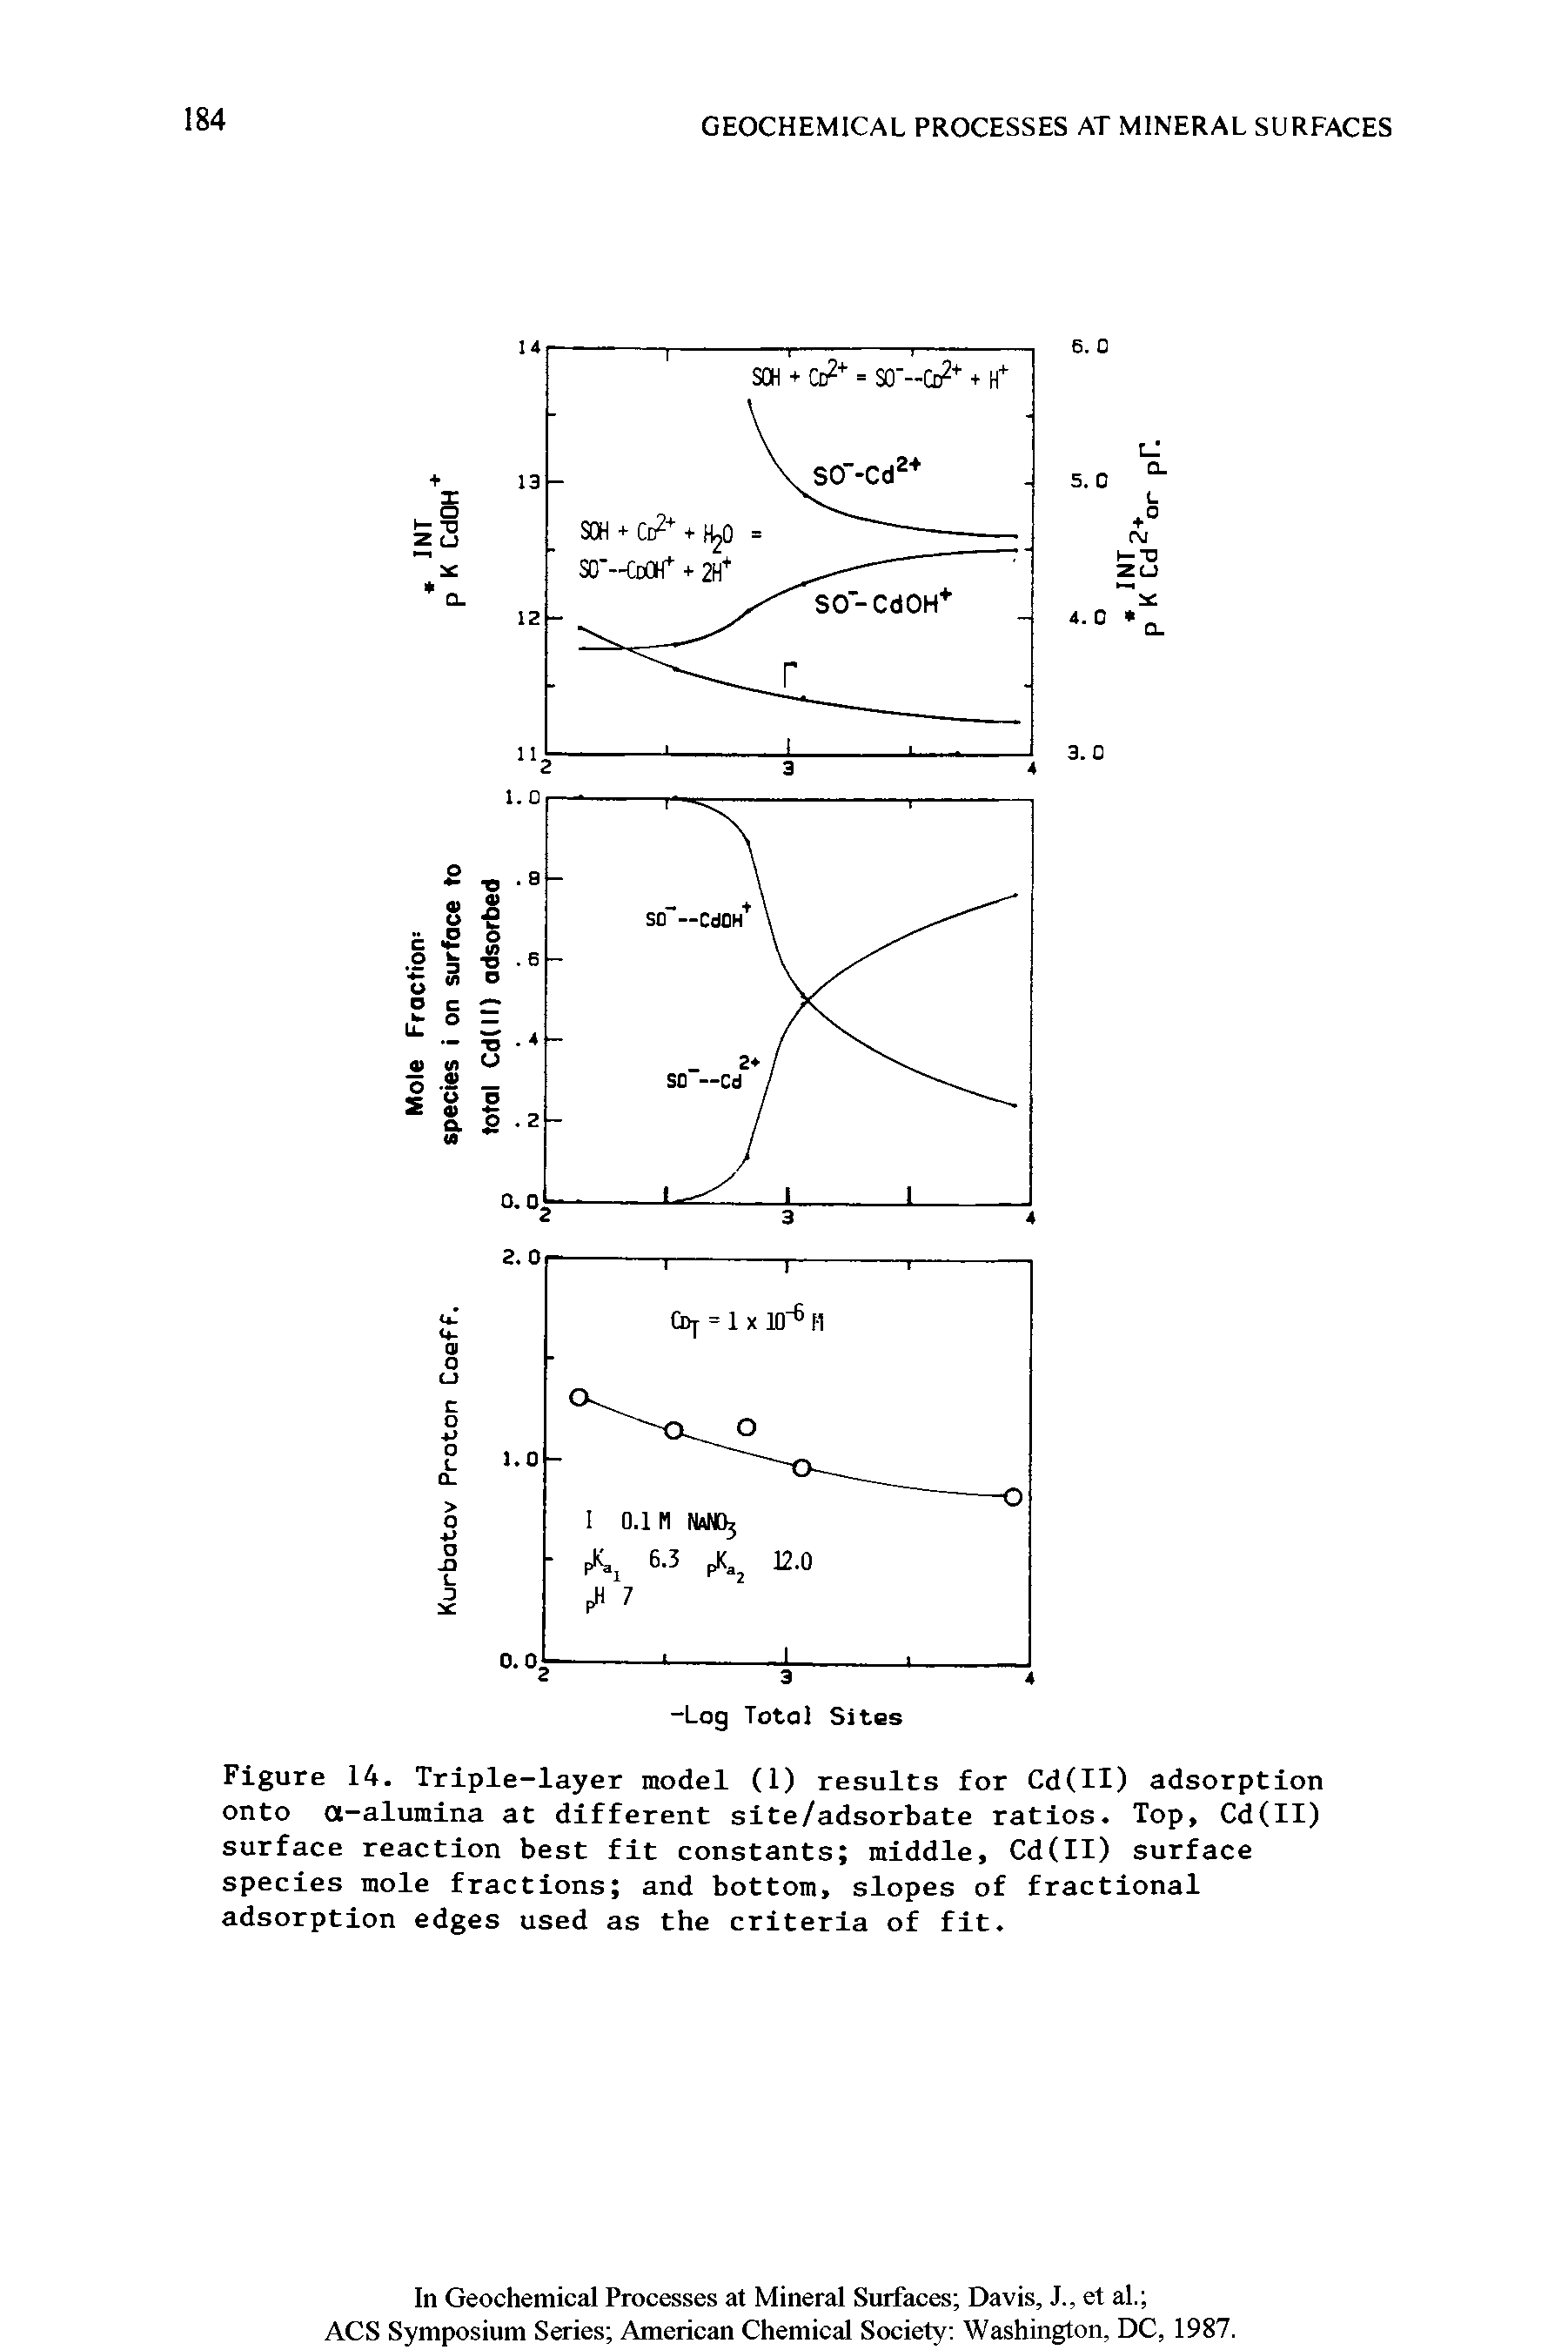 Figure 14. Triple-layer model (1) results for Cd(II) adsorption onto a-alumina at different site/adsorbate ratios. Top, Cd(II) surface reaction best fit constants middle, Cd(II) surface species mole fractions and bottom, slopes of fractional adsorption edges used as the criteria of fit.